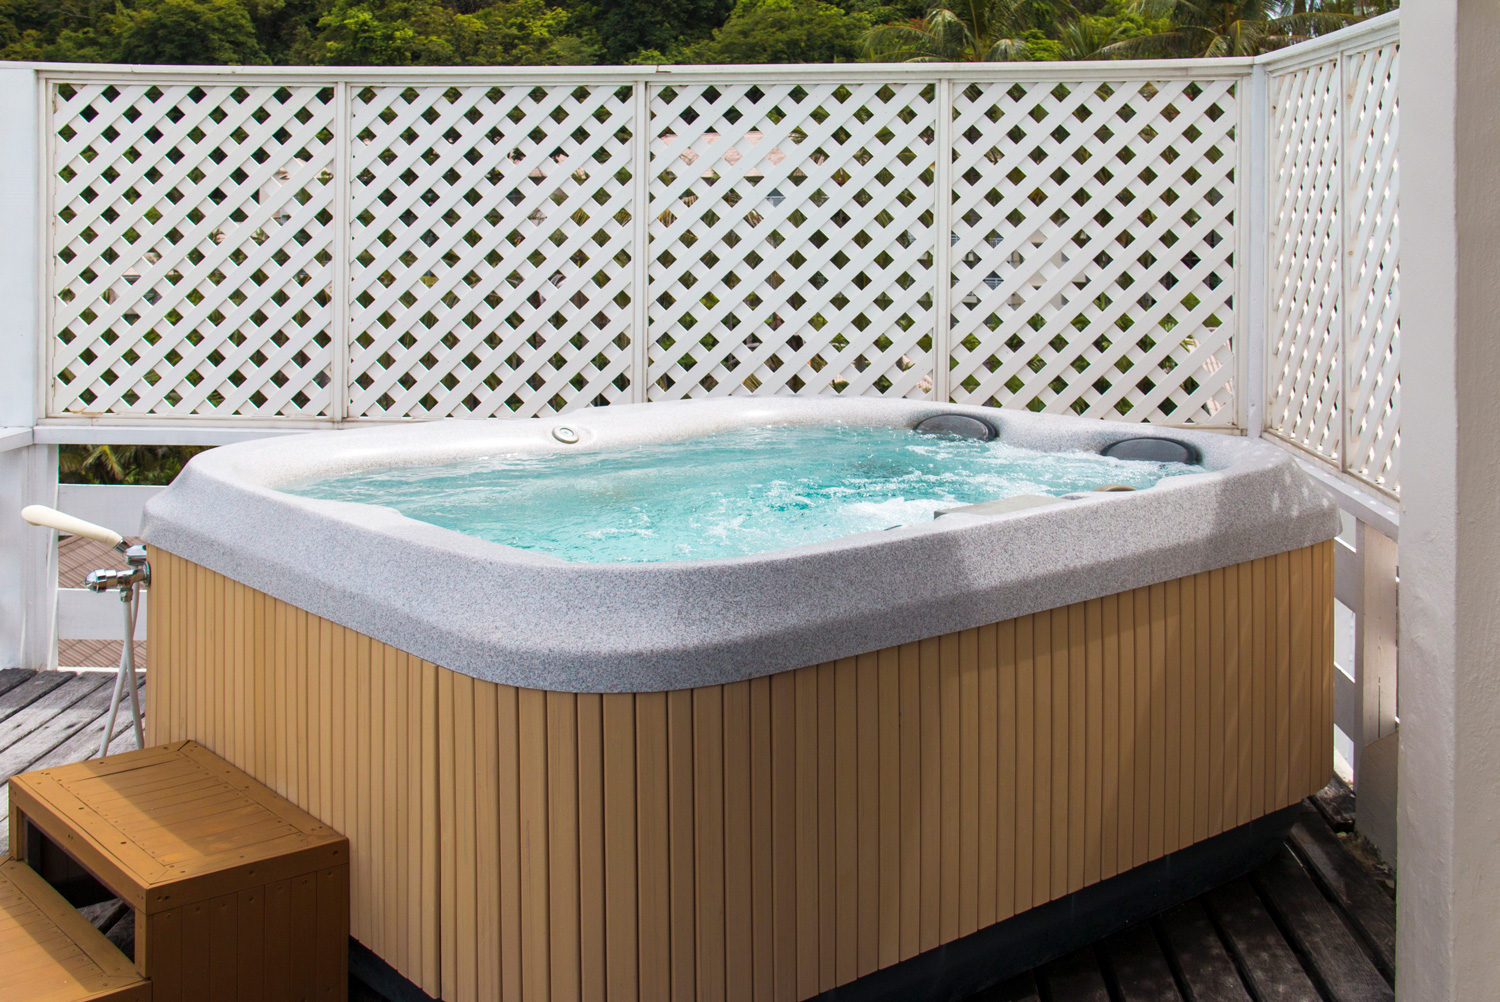 Wooden hot tub with swirling water at outdoor.